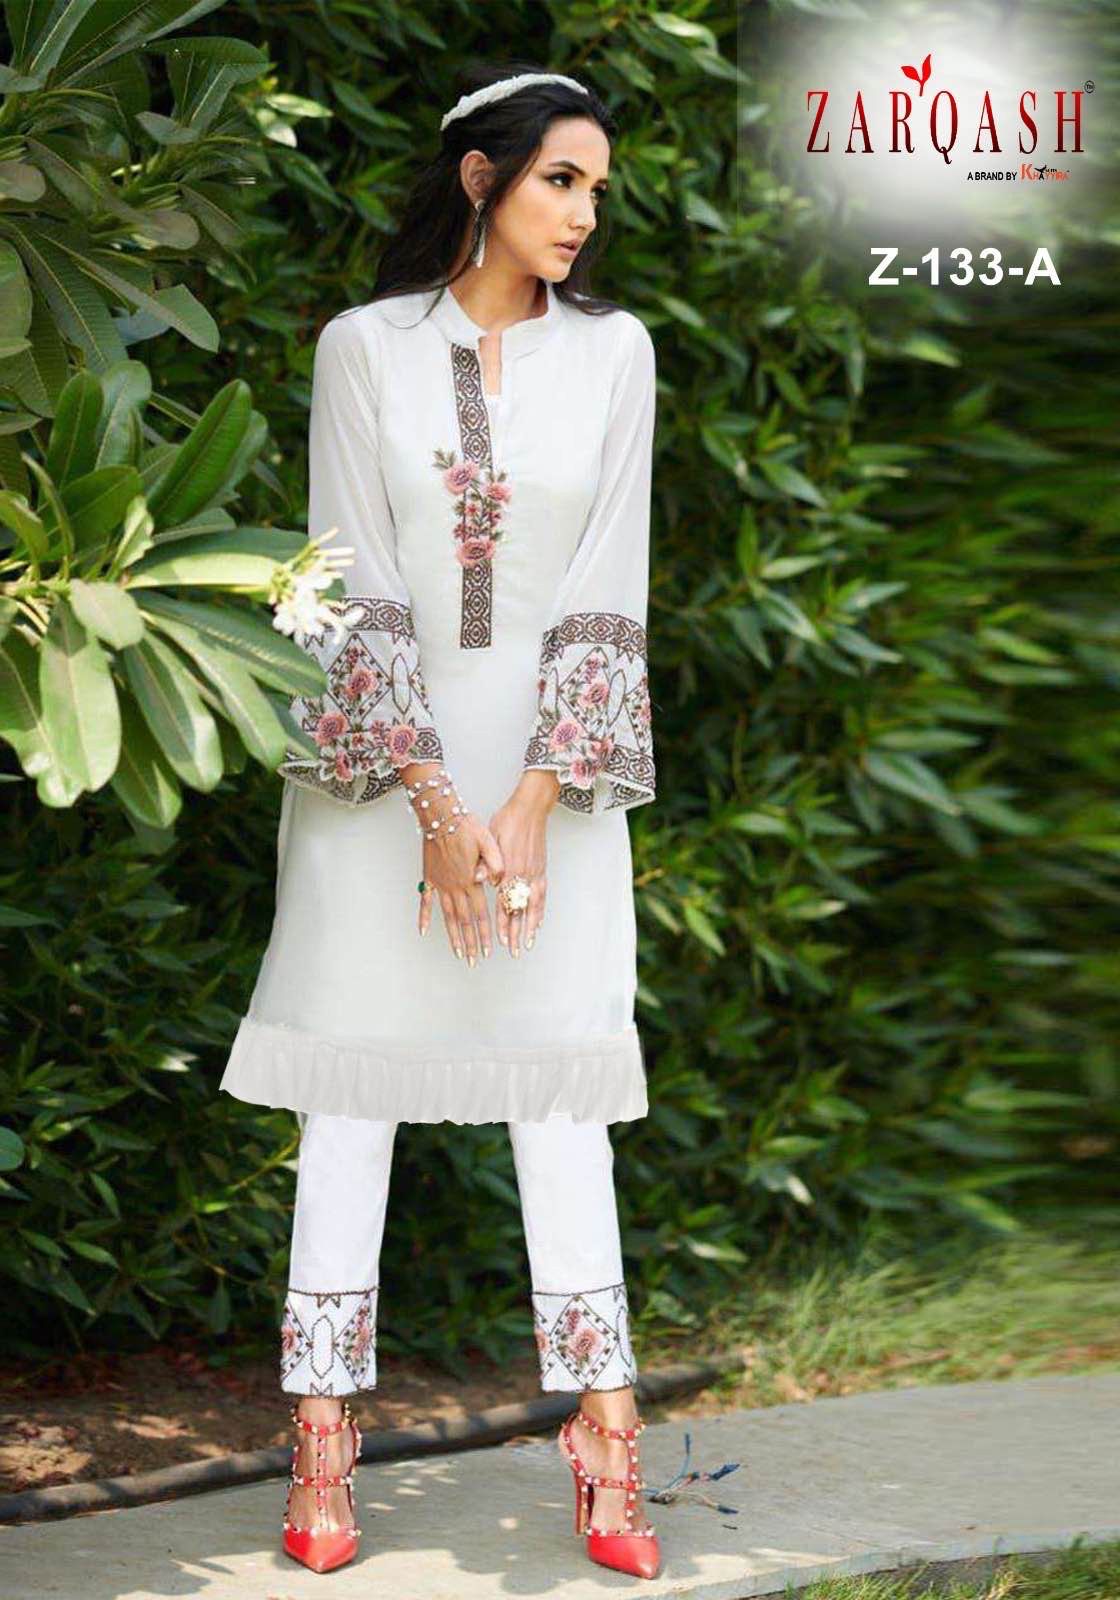 What are the best kurti brands for summer fashion? - Quora